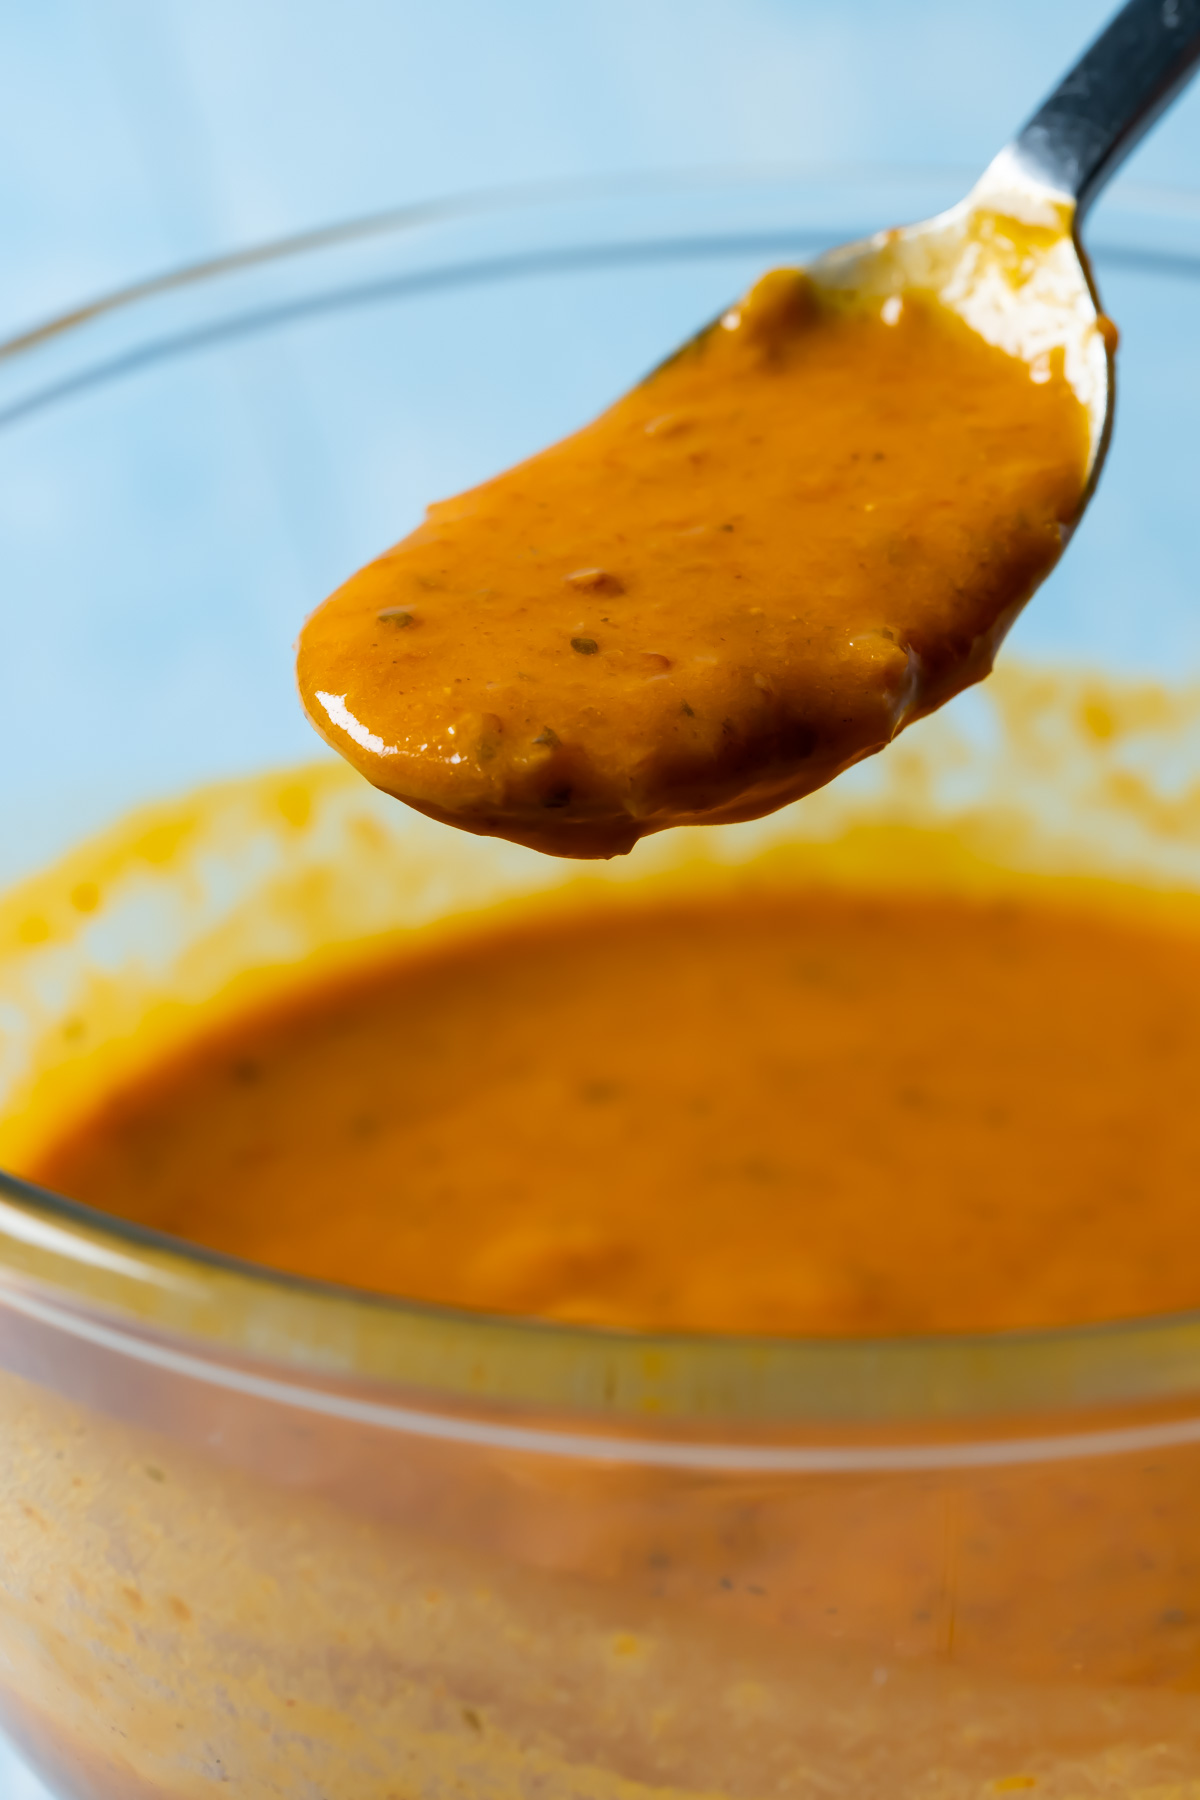 Vegan buffalo sauce in a glass bowl with a spoon.